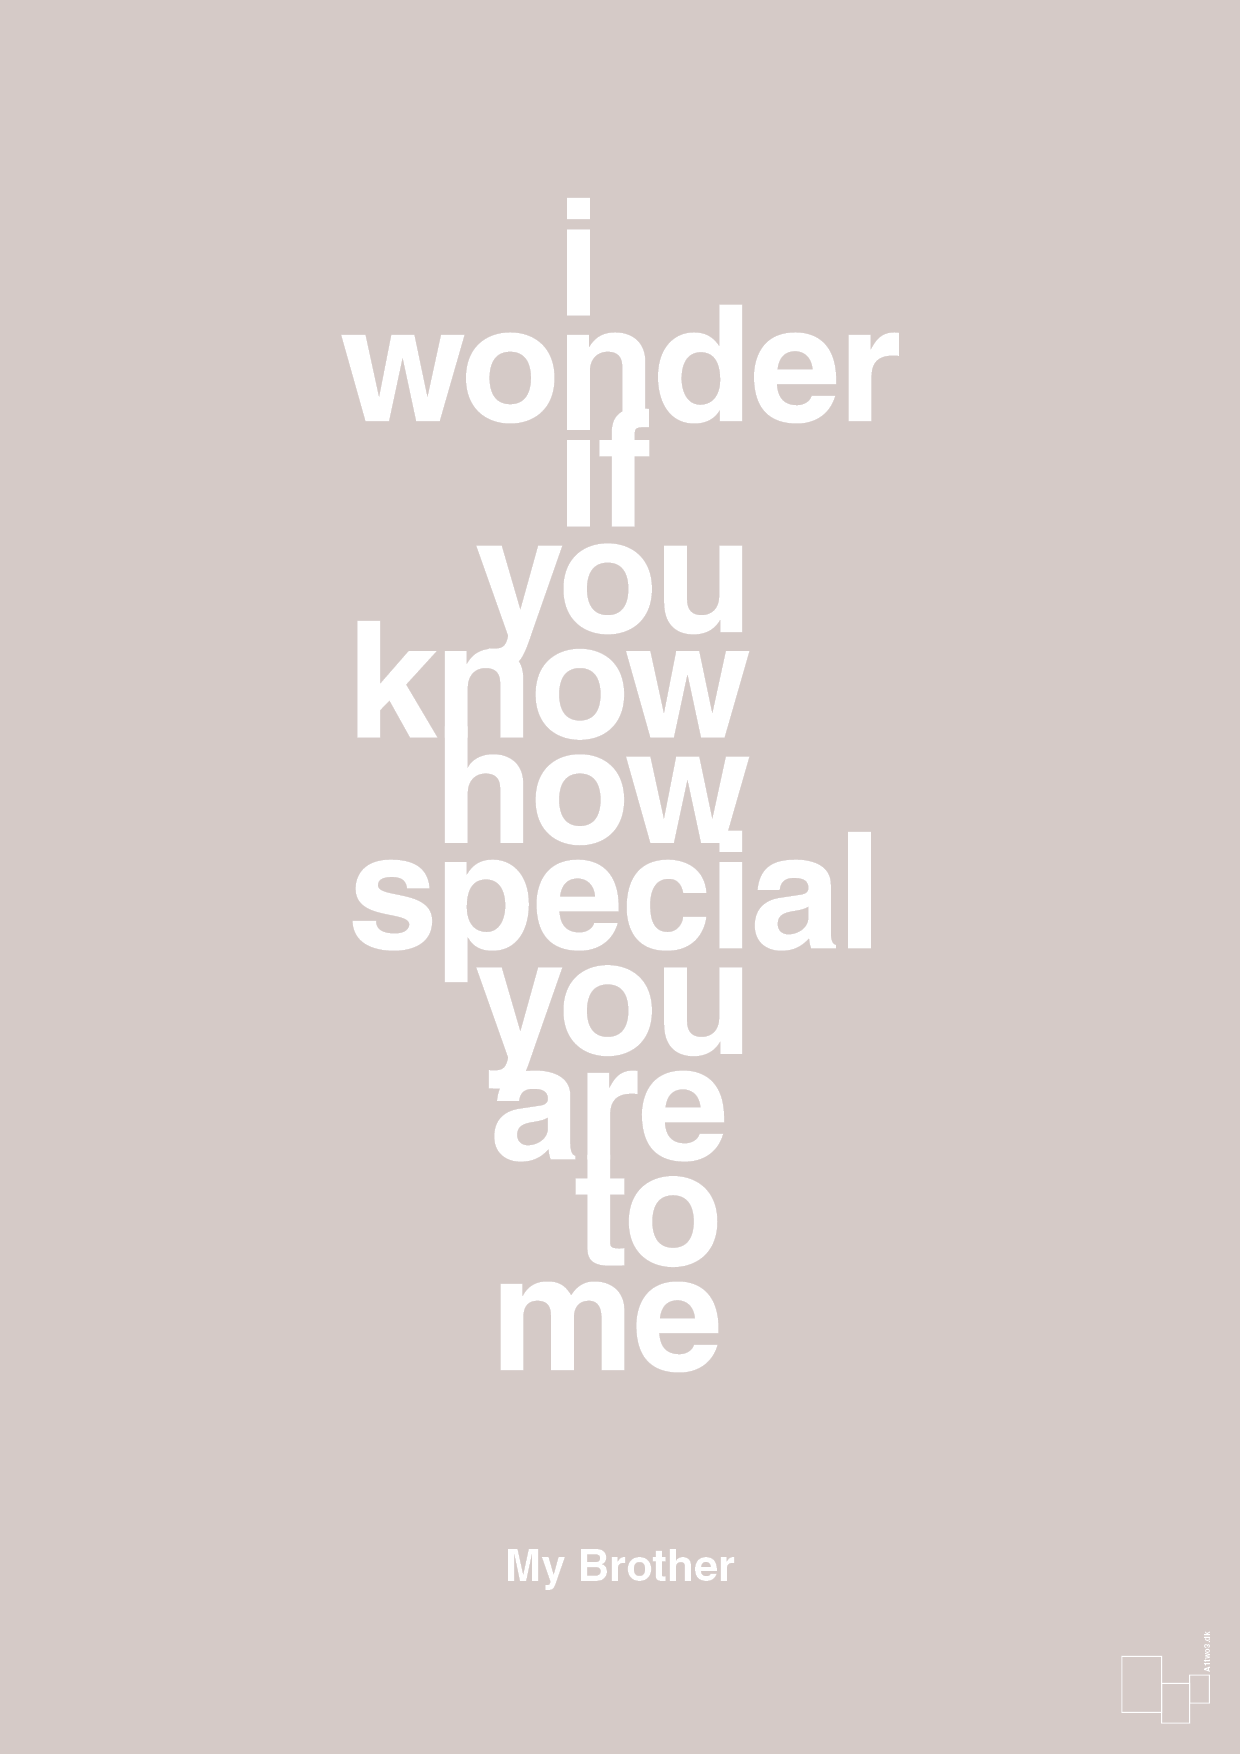 my brother - i wonder if you know how special you are to me - Plakat med Citater i Broken Beige